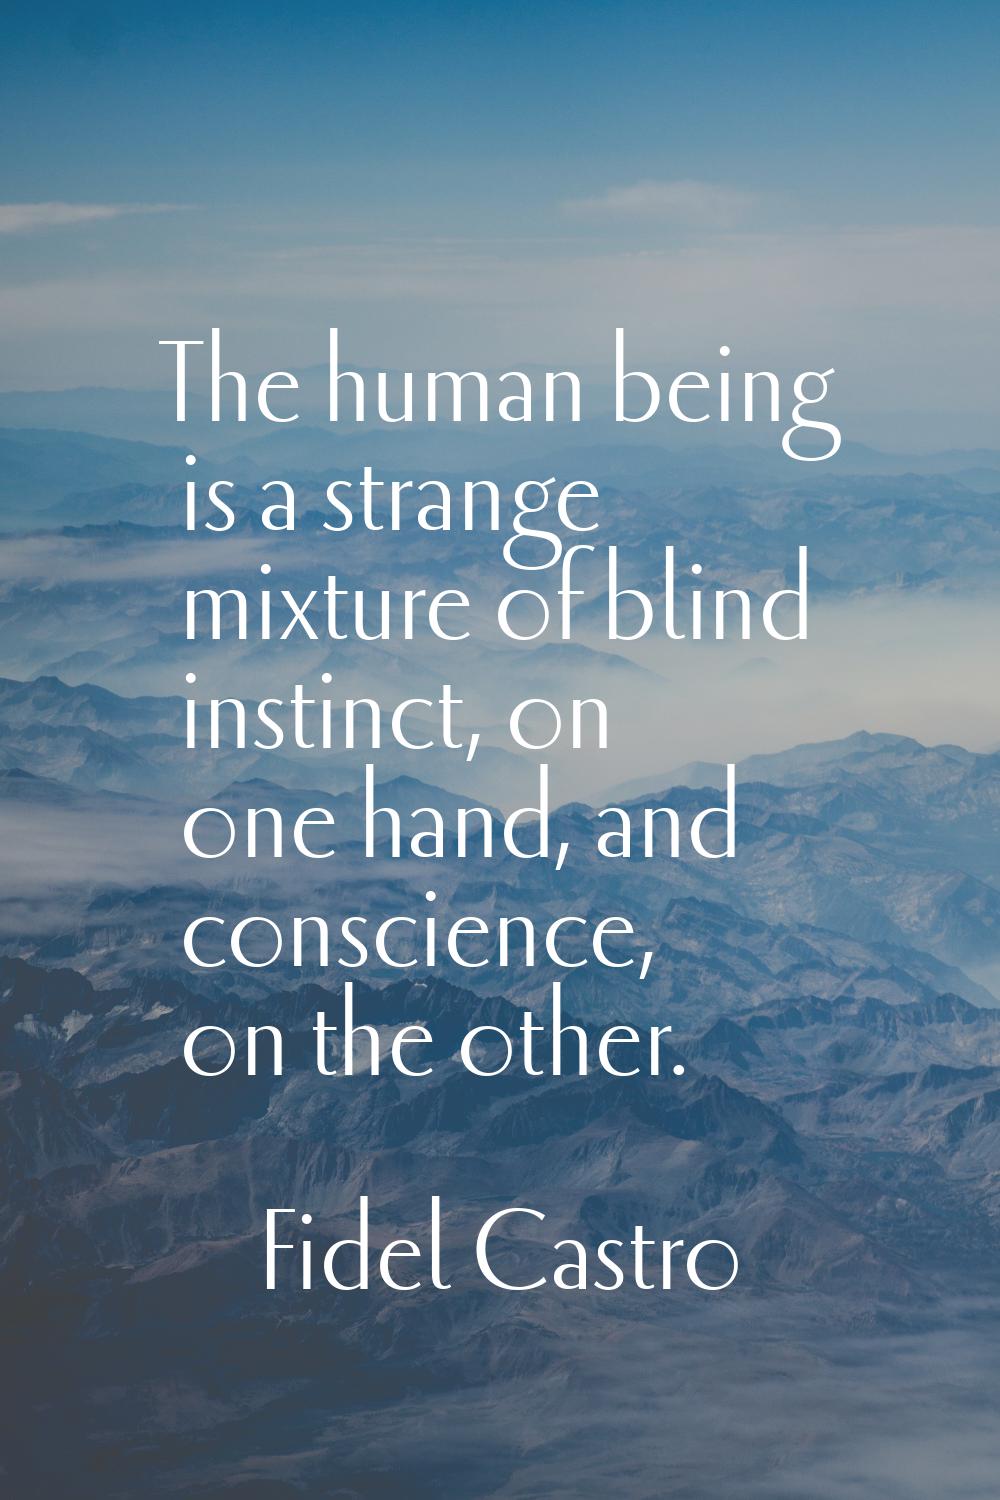 The human being is a strange mixture of blind instinct, on one hand, and conscience, on the other.